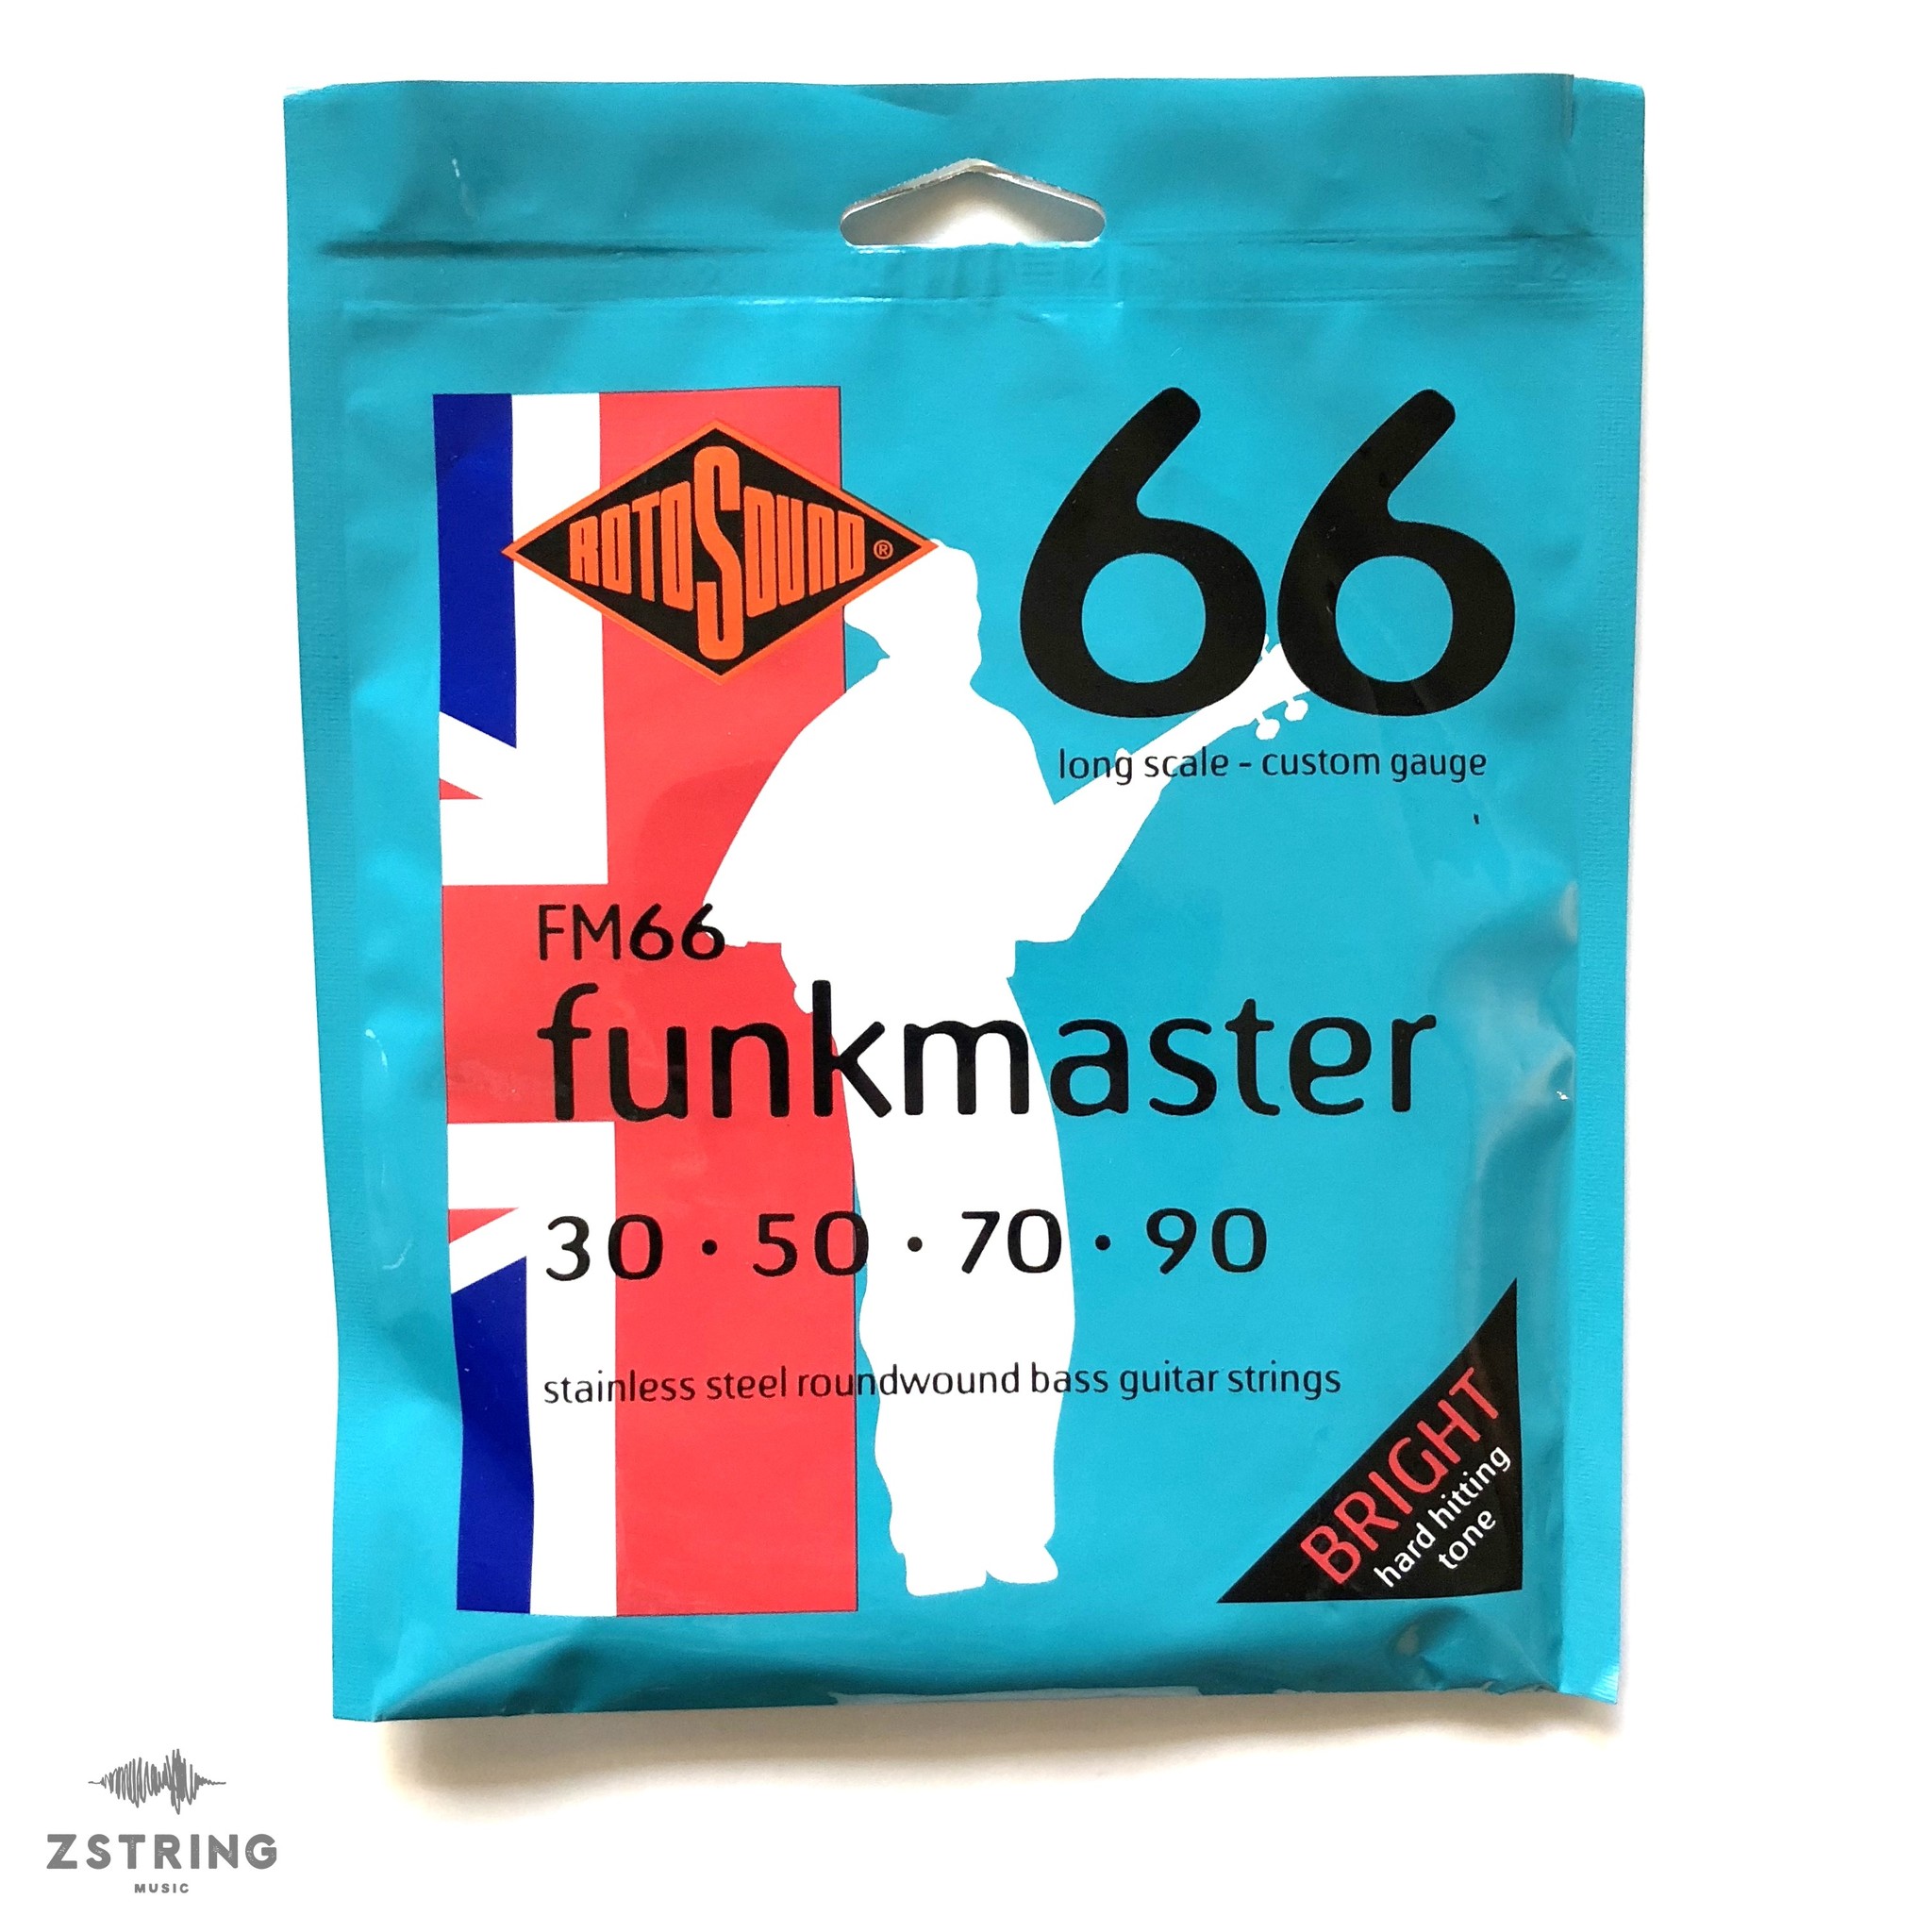 Rotosound FM66 Funkmaster Stainless Steel Roundwound Bass Strings - Long Scale - Custom Gauge